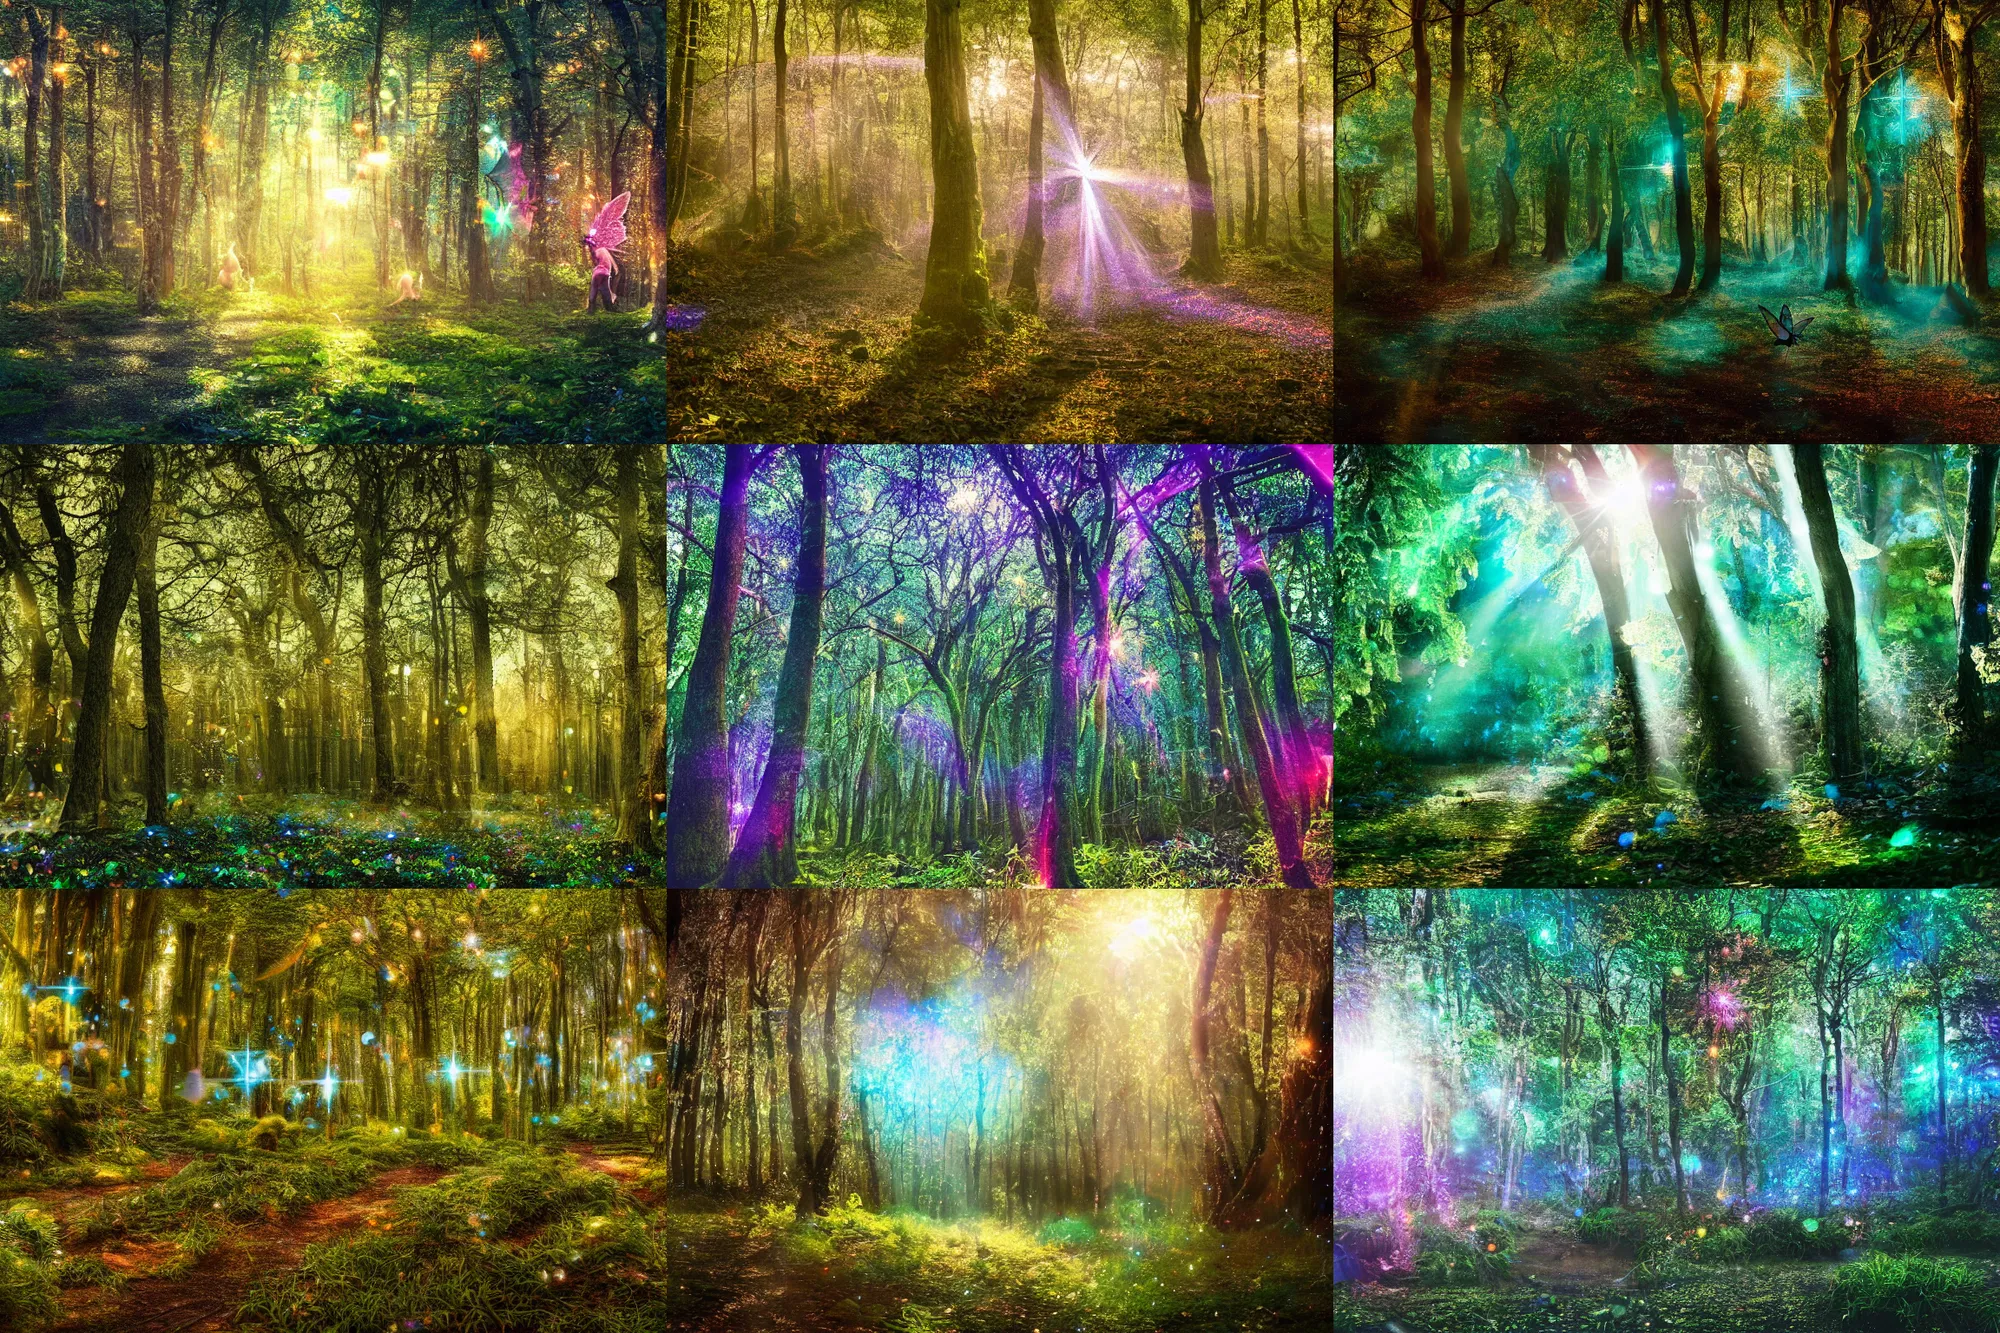 Prompt: photo of a beautiful magical fantasy forest, glowing tiny winged fairies flying throughout leaving sparkling trails in the air, sunlight filtering through the trees, dense, verdant, surrounded by beautiful iridescent sparkling bushes, stunning sparkling opalescent trees, 35mm photo, award-winning magazine cover photo, nature photography, cinematic, dramatic, establishing shot